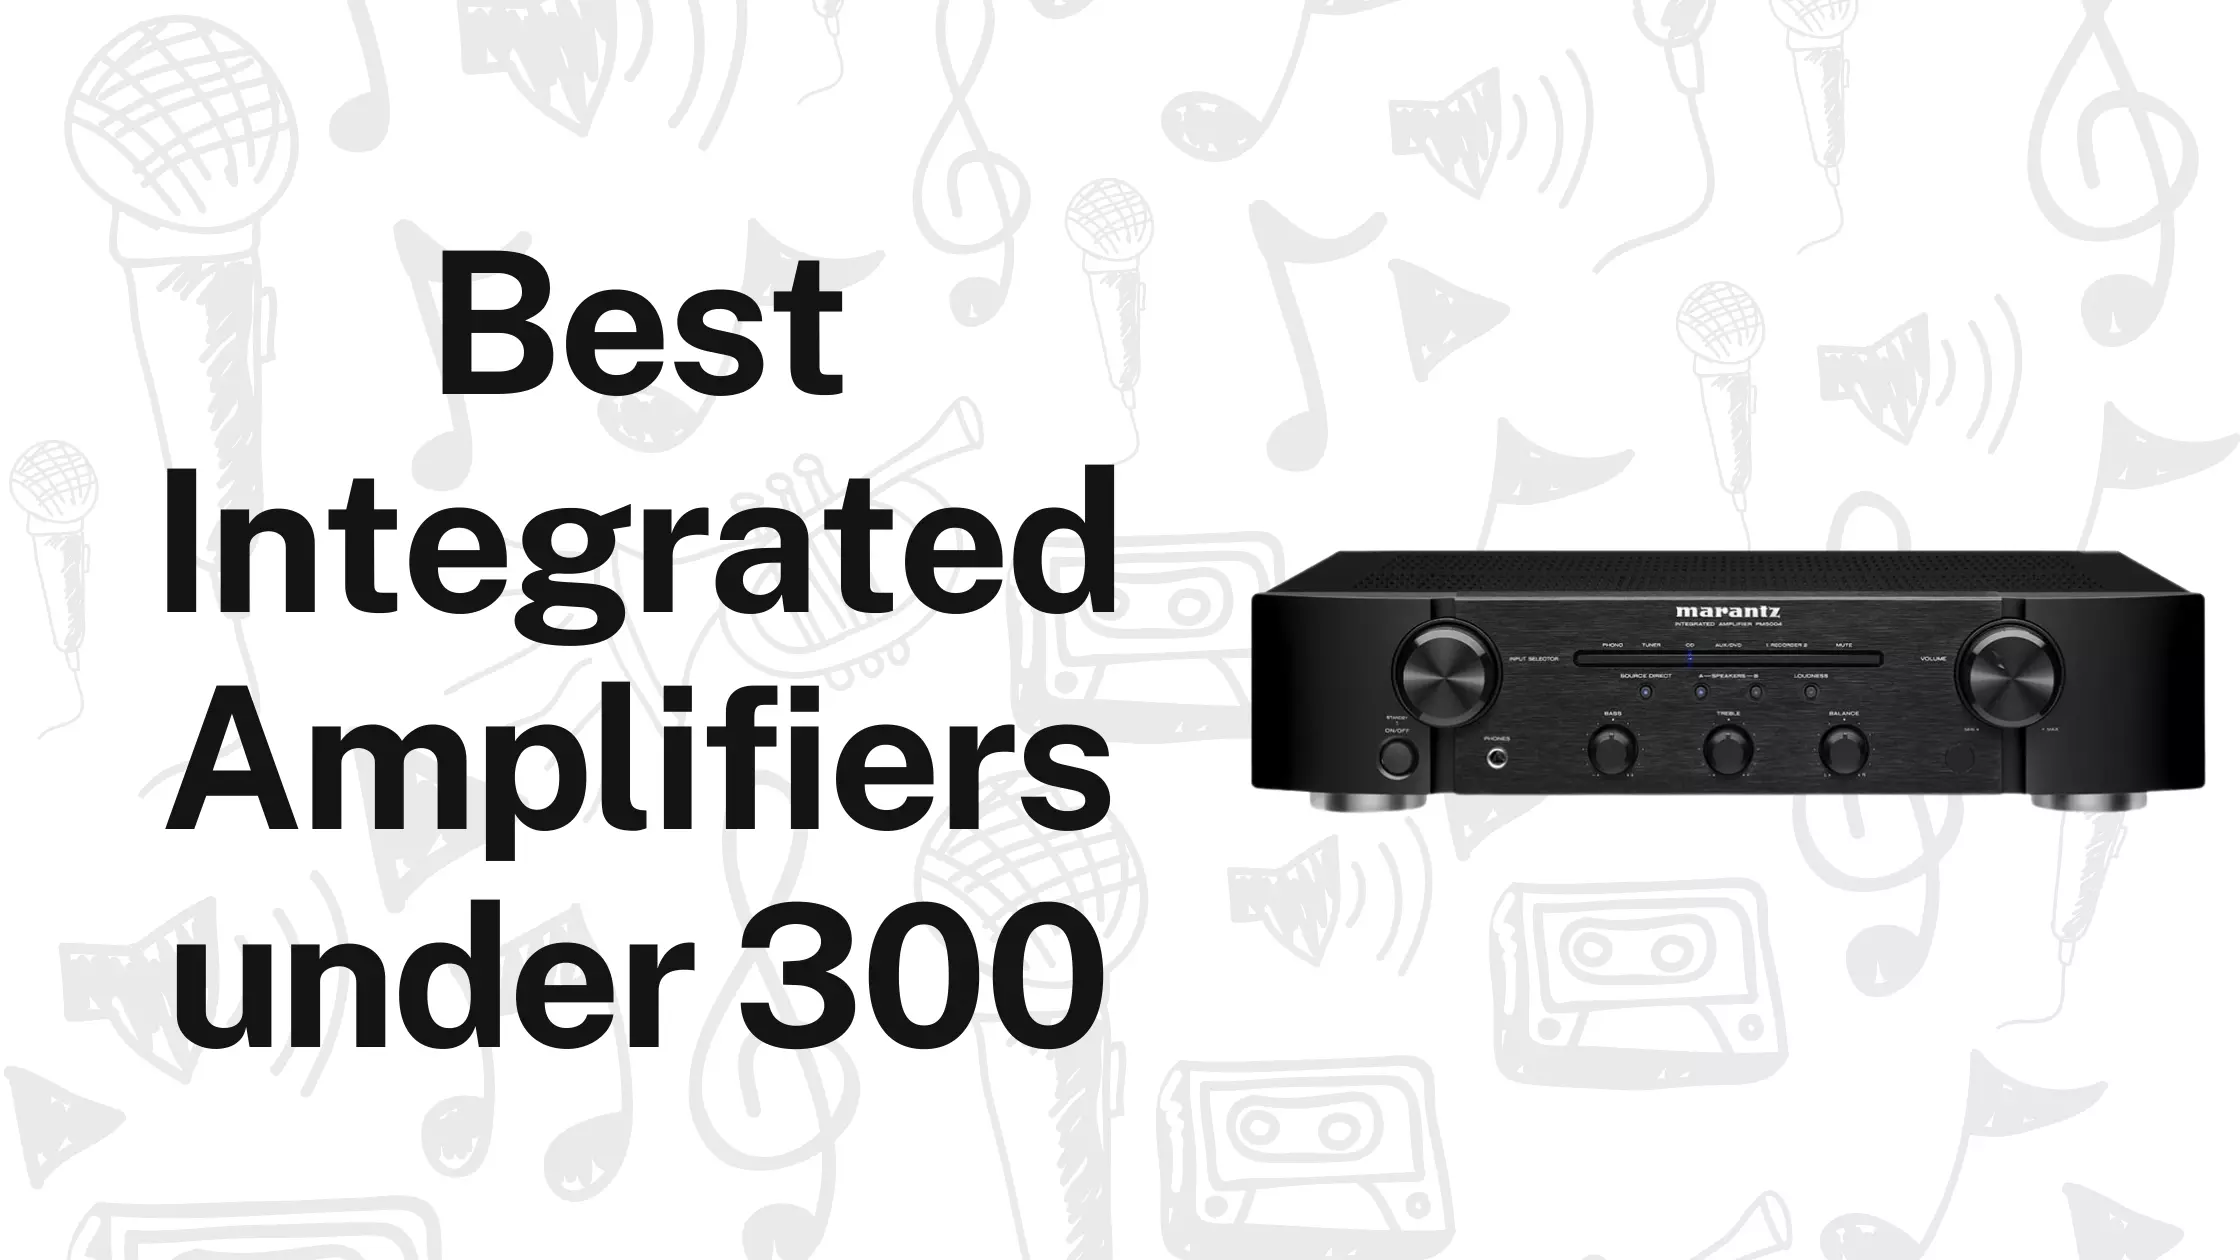 Best Integrated Amplifiers Under $300 With Complete Details